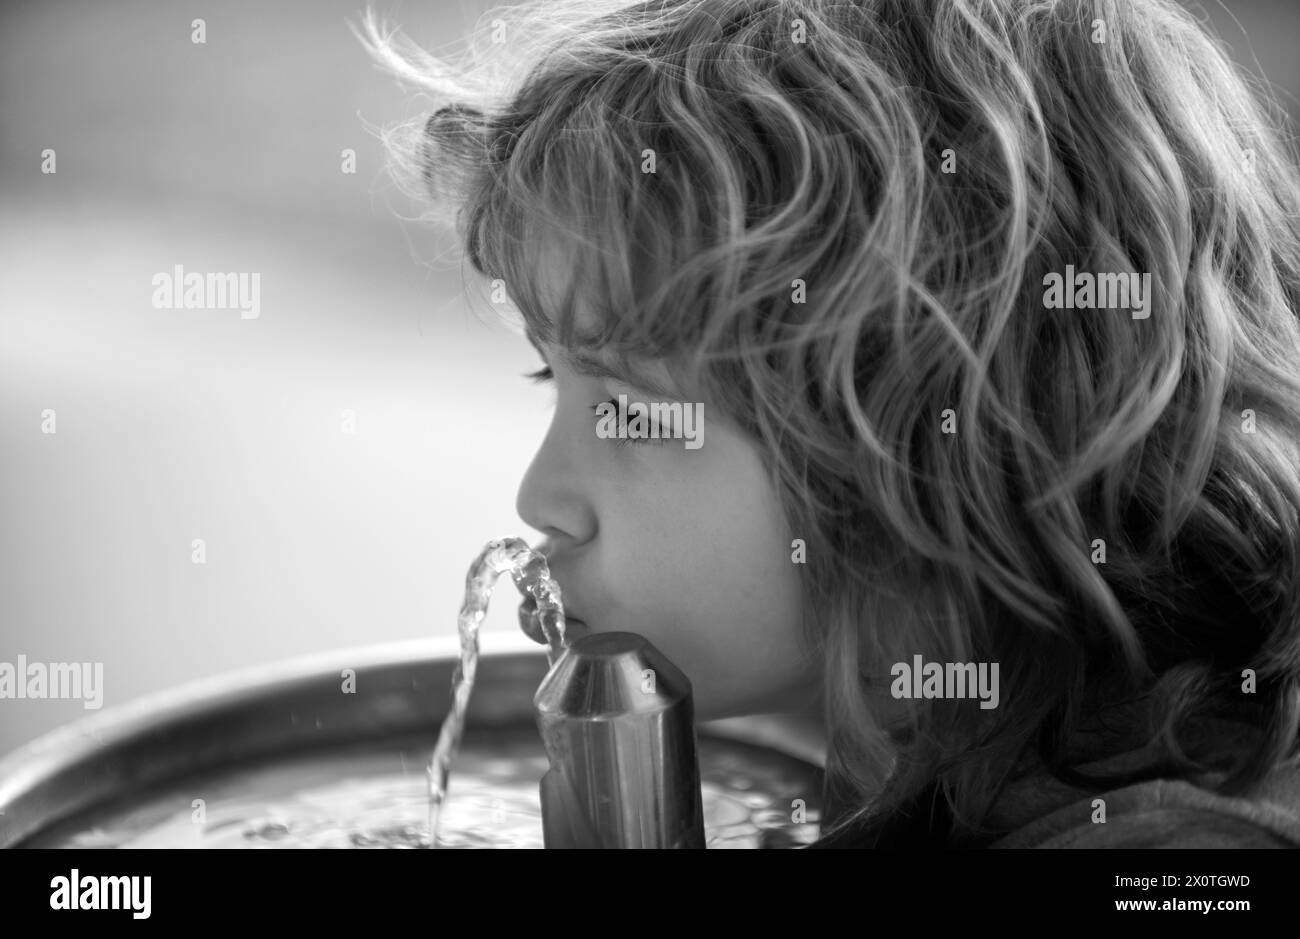 Child drinking water from a water fountain in park outdoor. Stock Photo